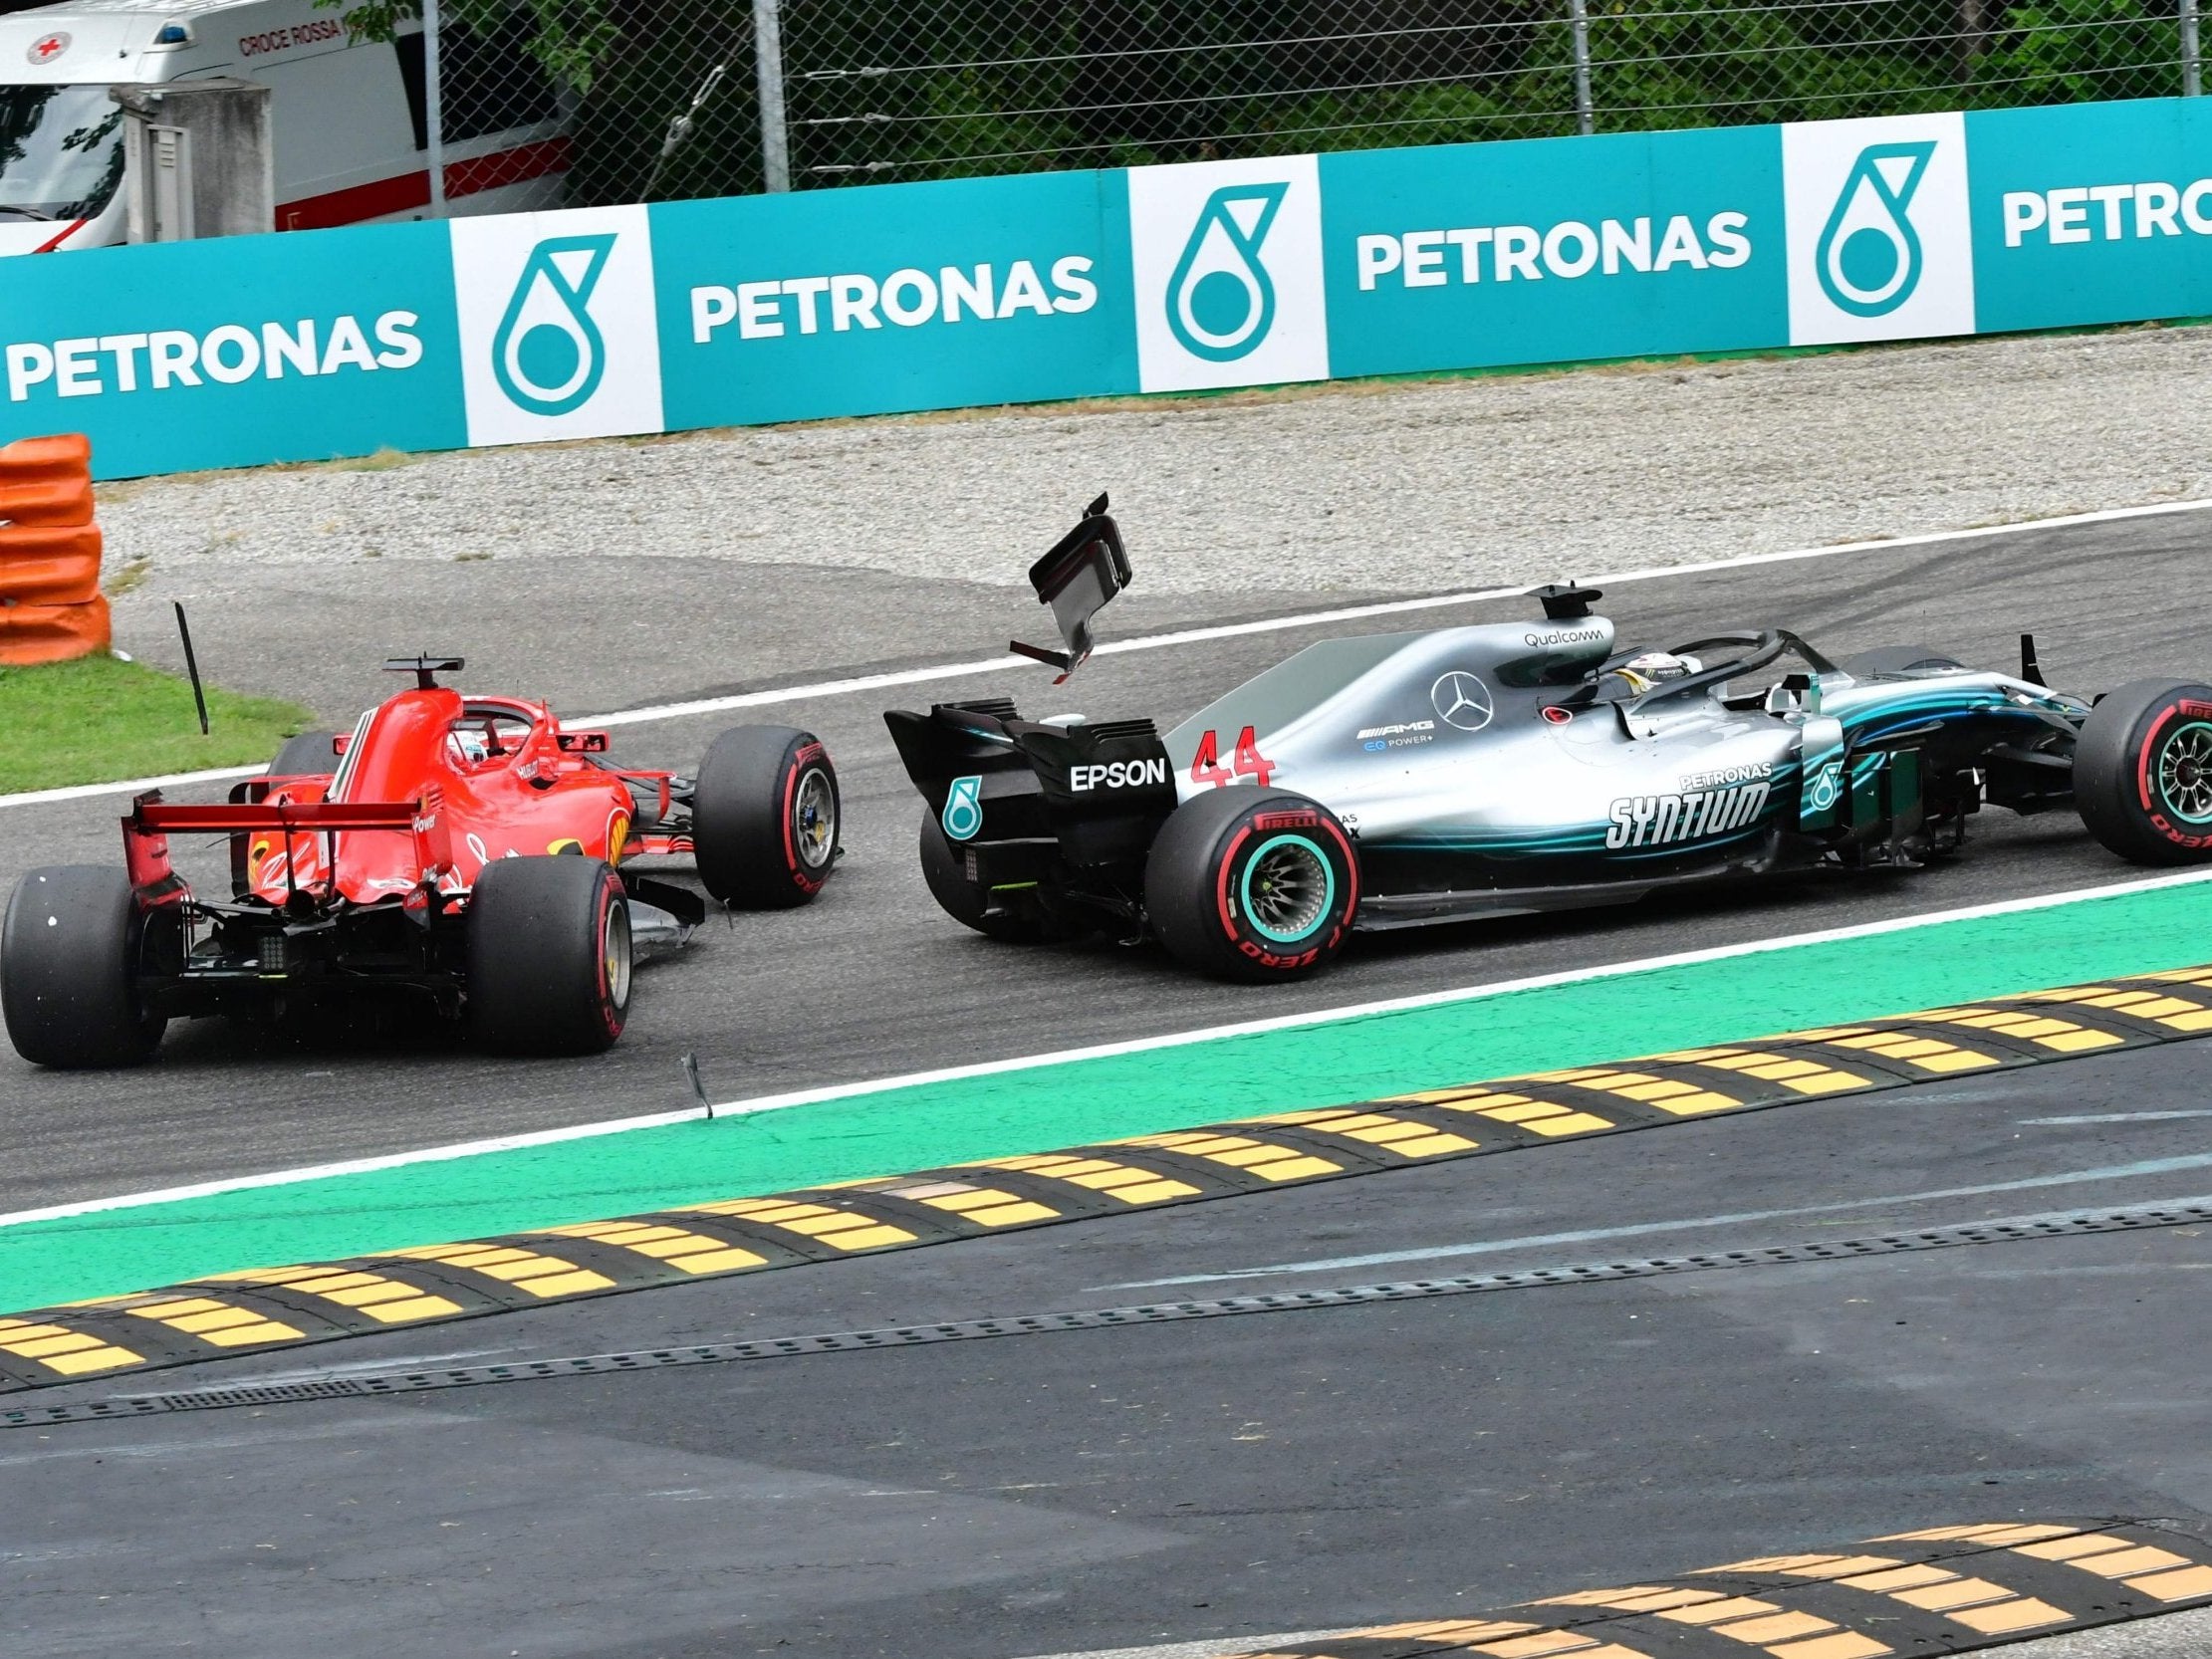 Sebastian Vettel spins after contact with Lewis Hamilton during the Italian Grand Prix